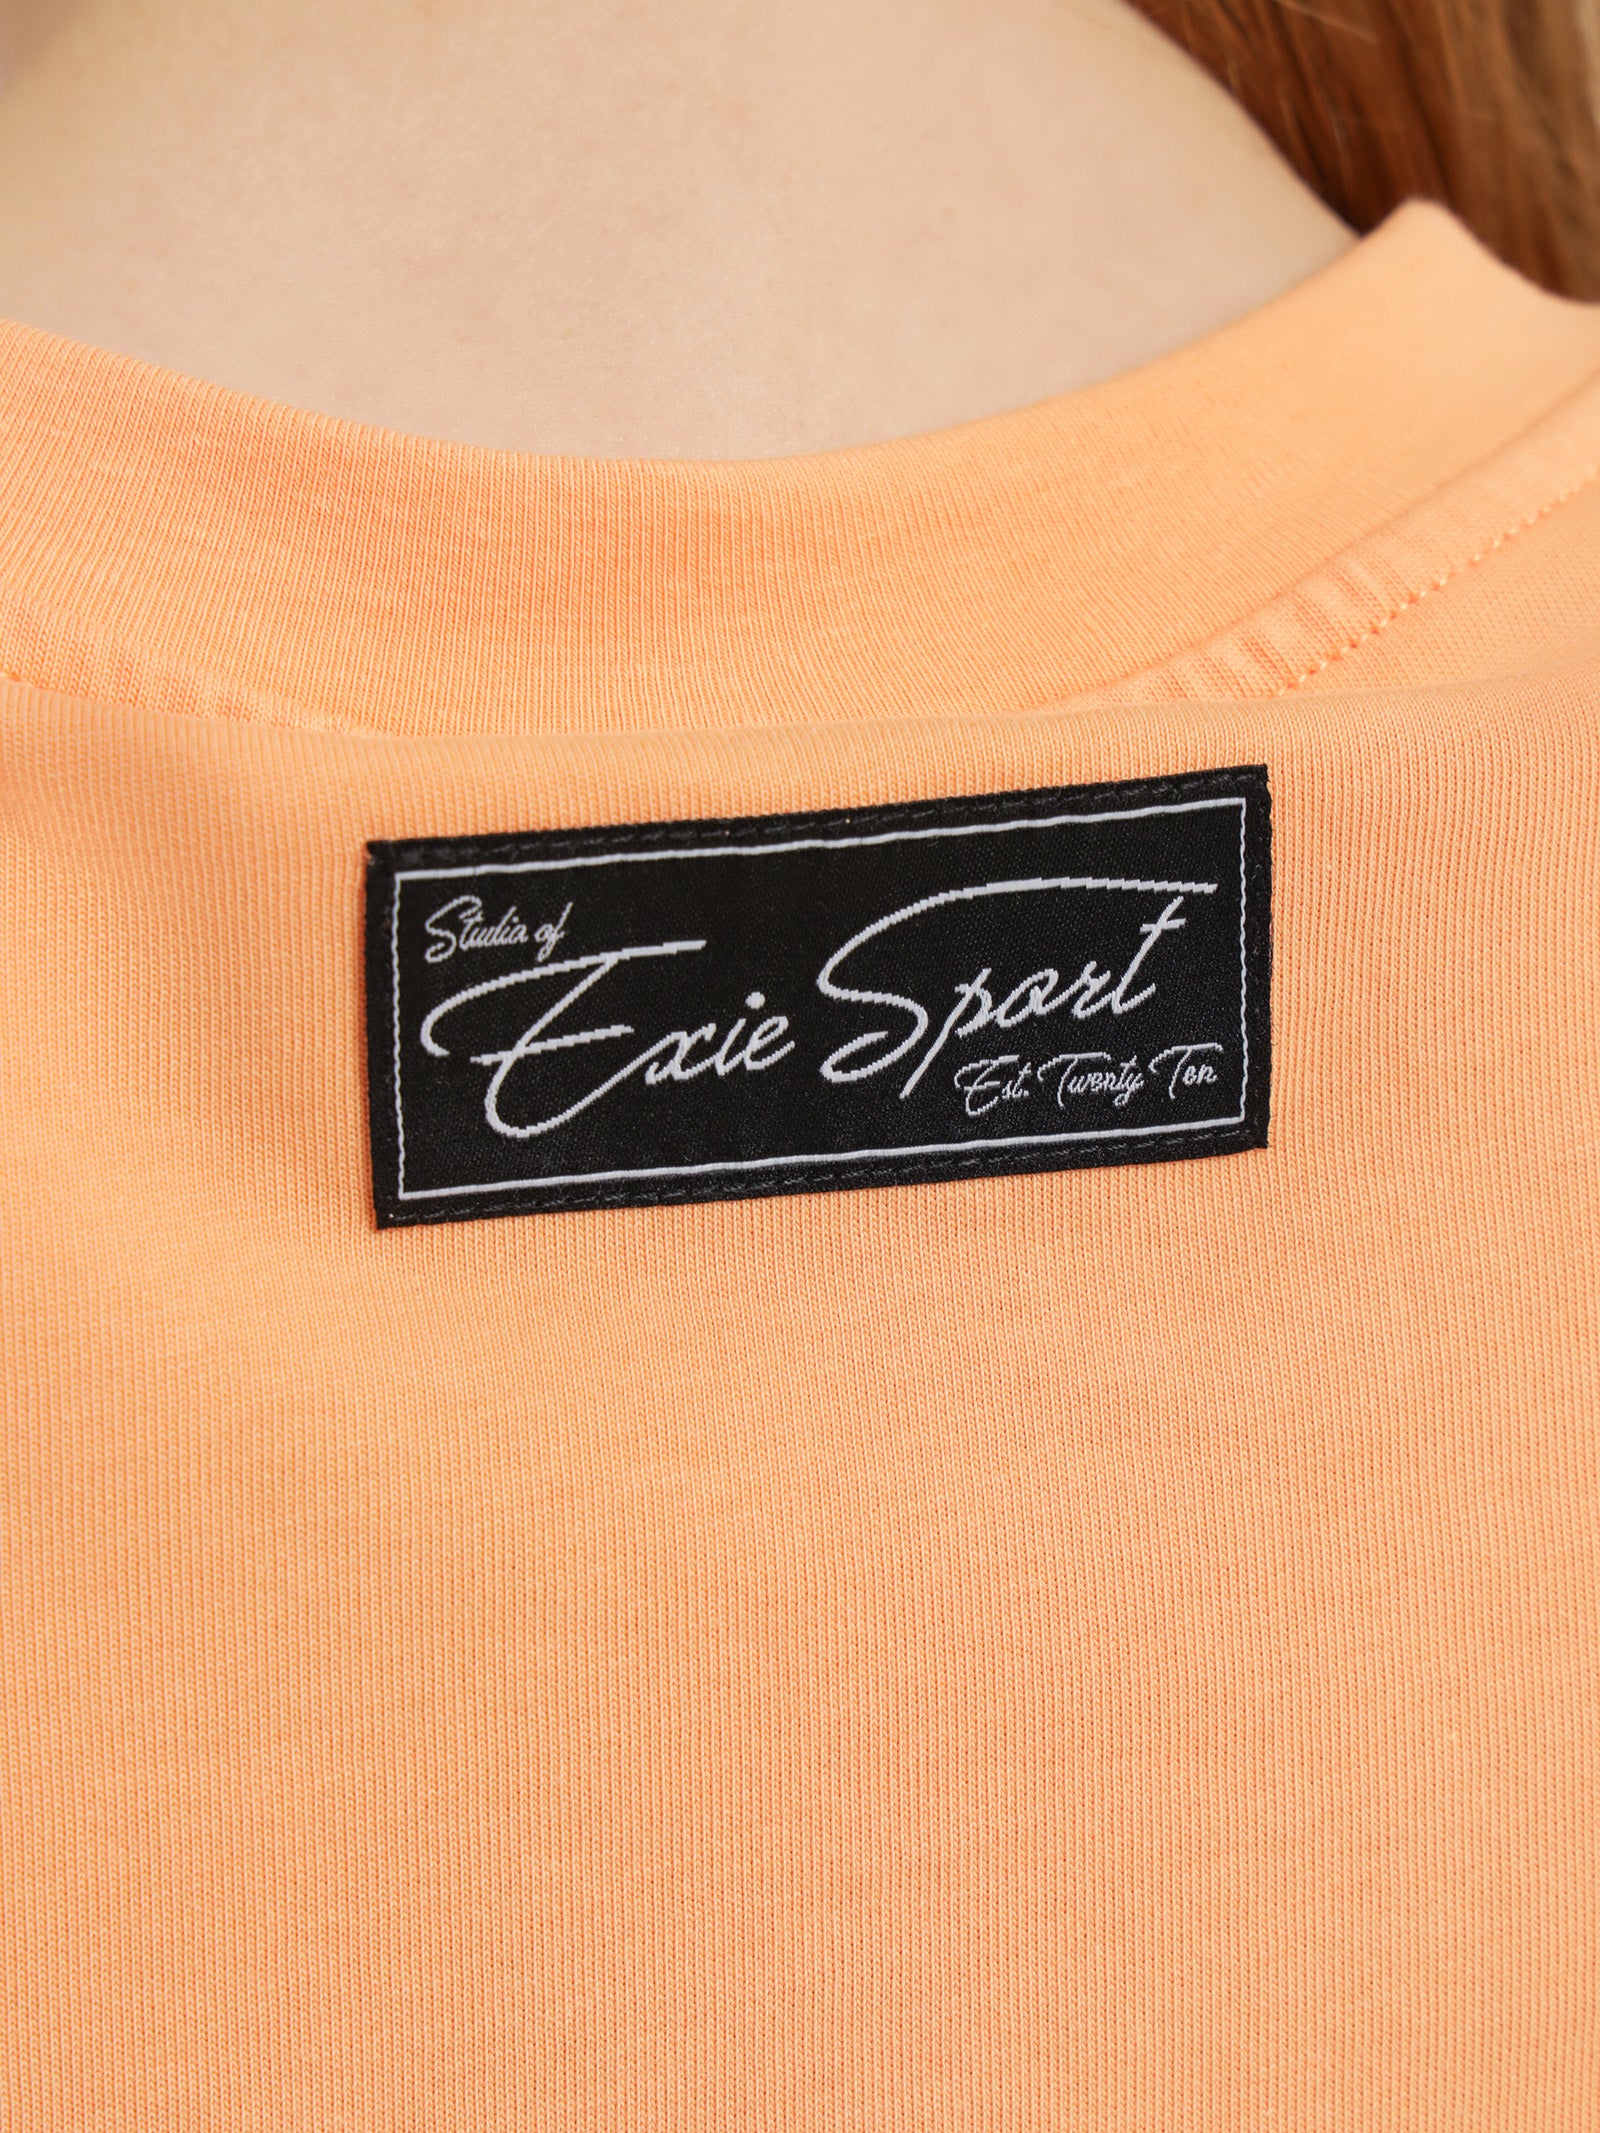 Exie Sport T-Shirt in Apricot